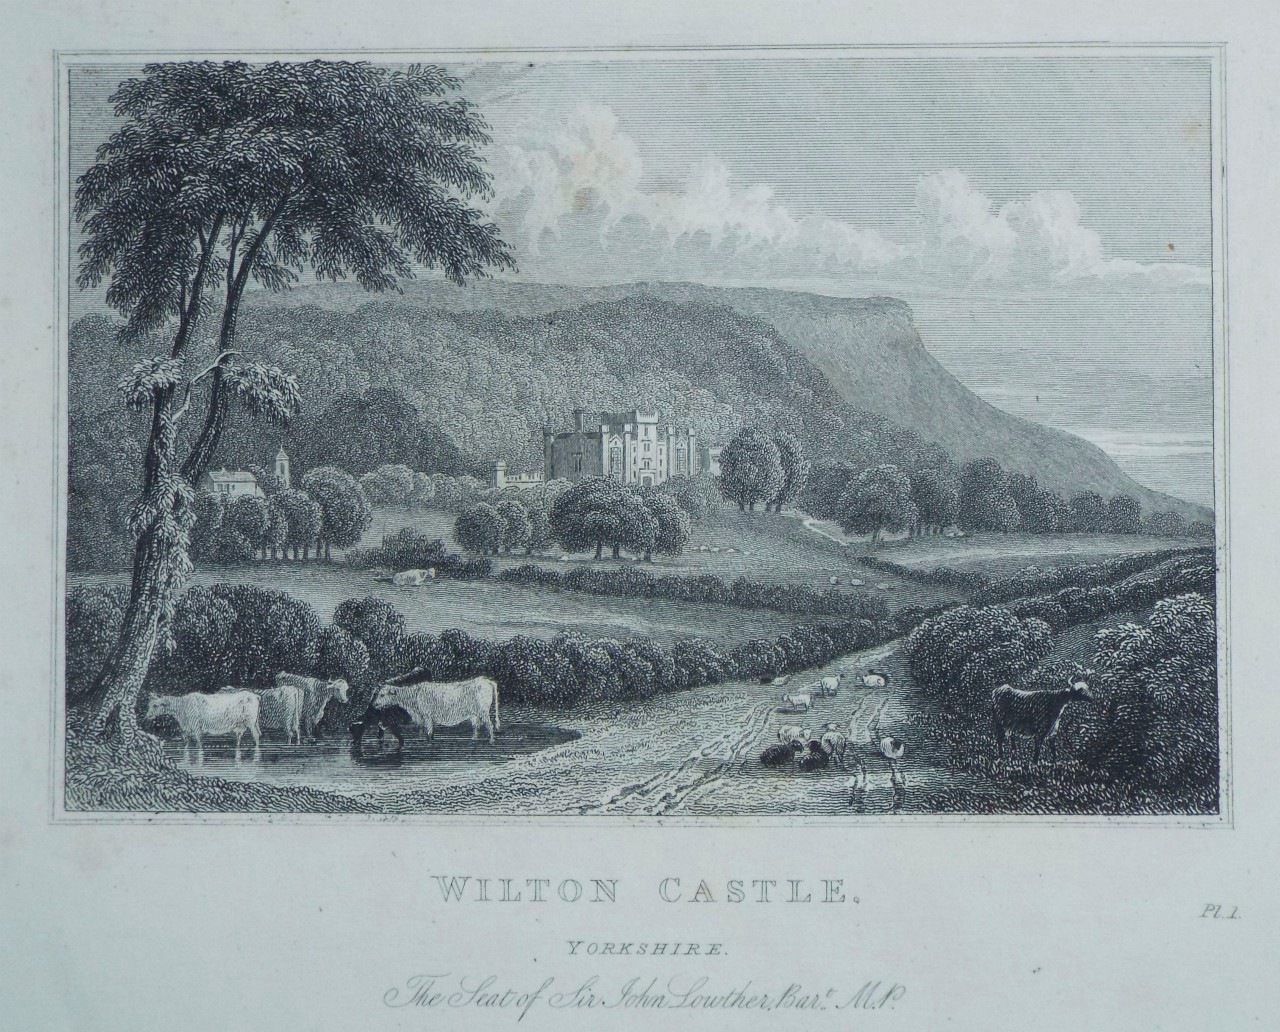 Print - Wilton Castle, Yorkshire. The Seat of Sir John Lowther, Bart. M.P. - Varrall